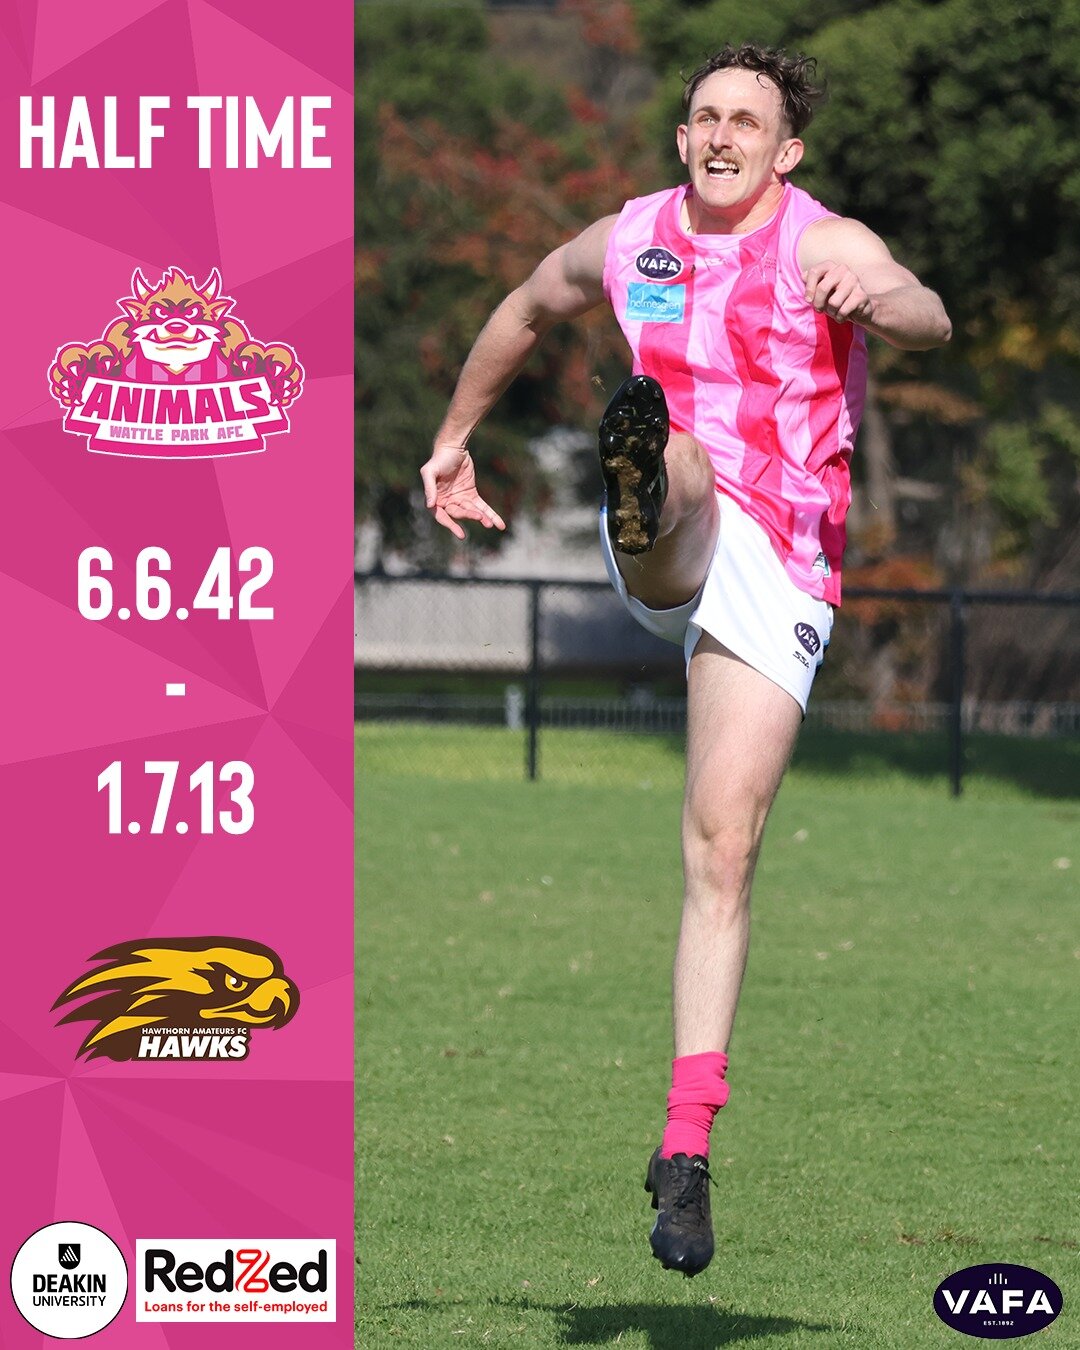 RESERVES

A solid lead at the break for the Twos

#WPvHAW #AnimalsFooty